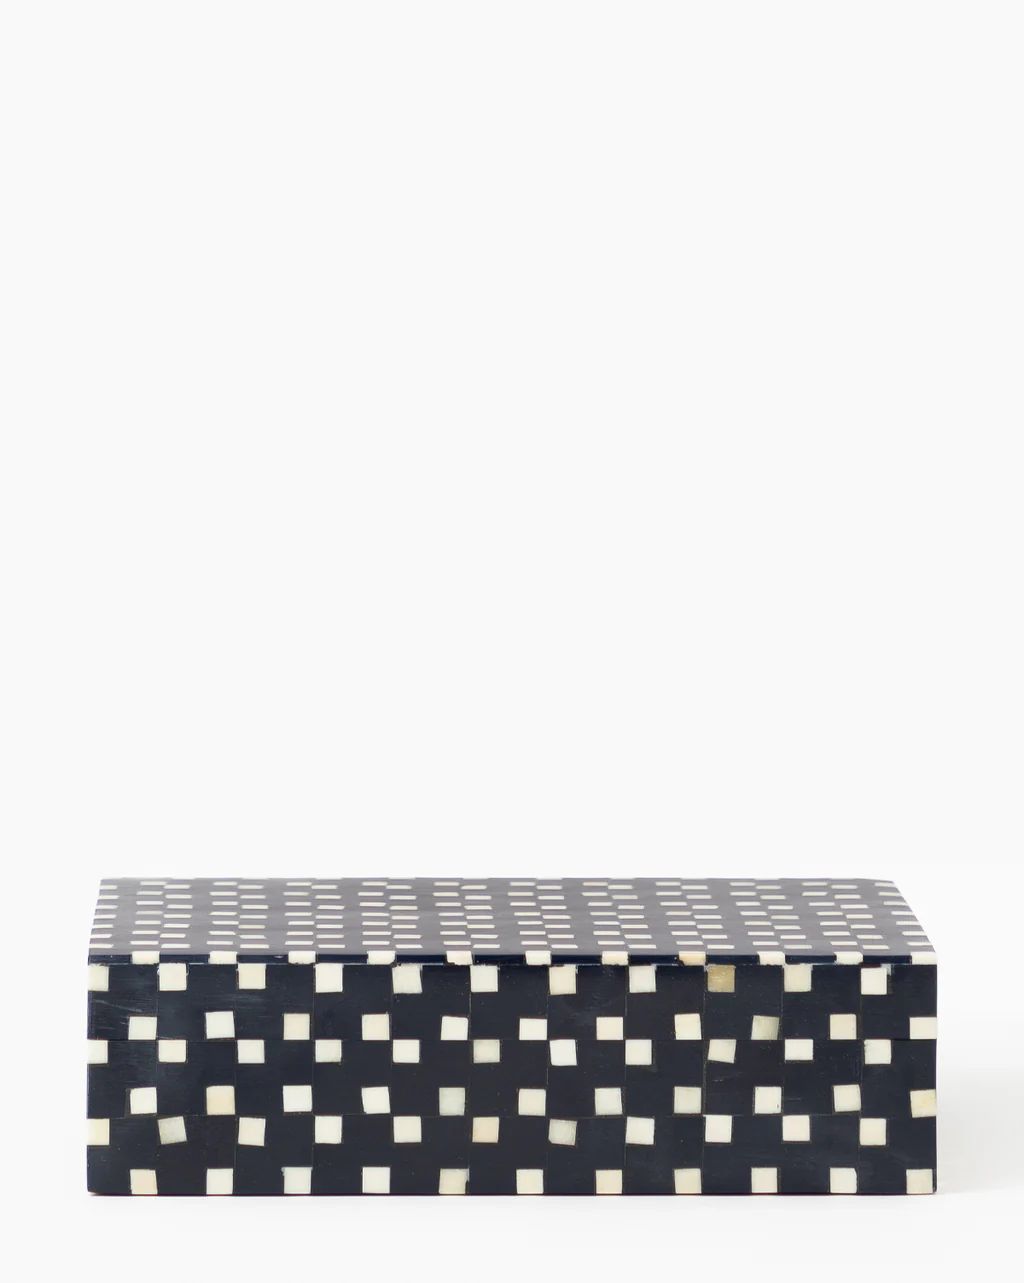 Hexagon Patterned Box | McGee & Co.